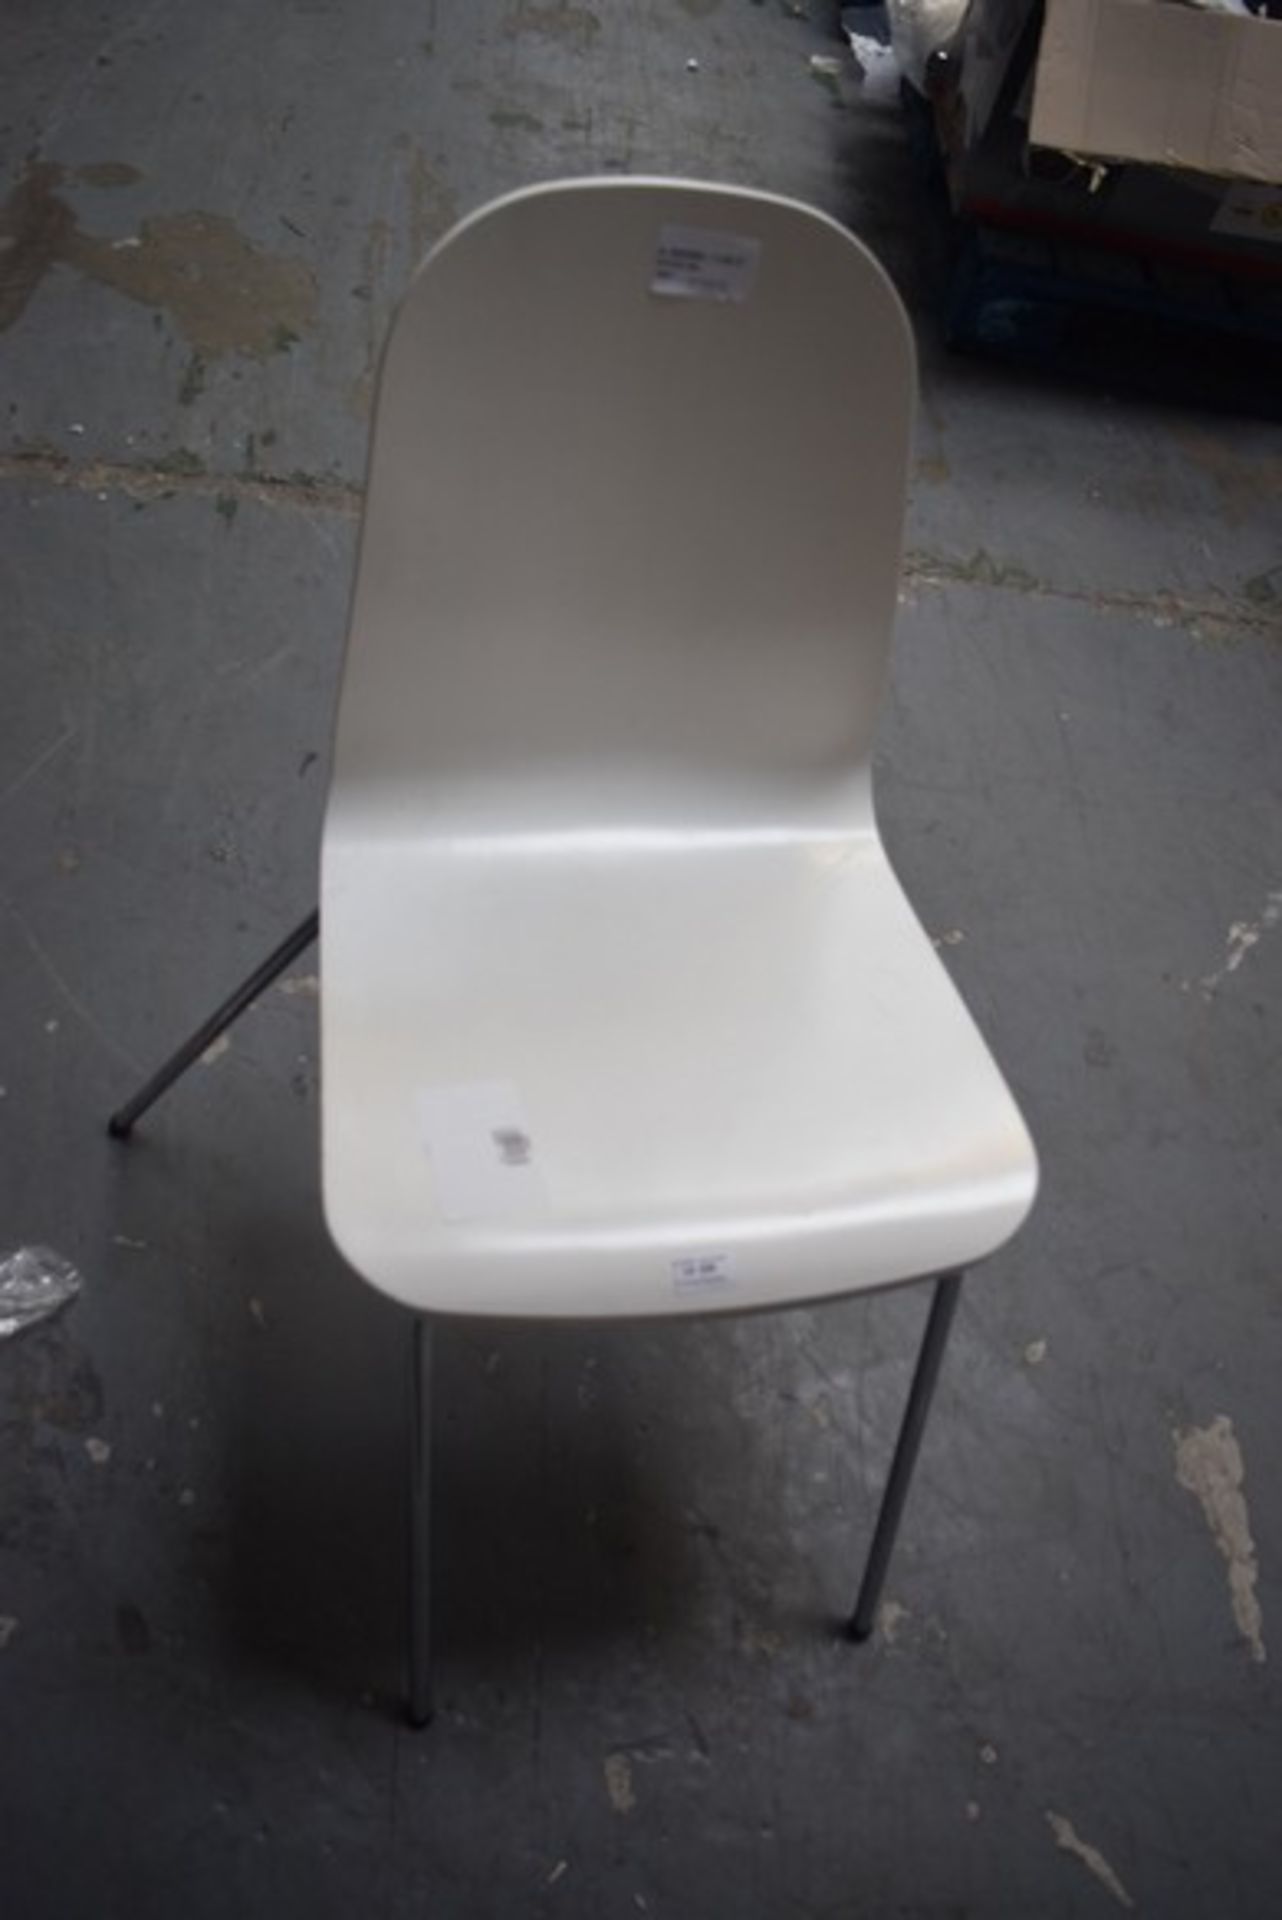 1 x FLUENT DINING CHAIR RRP £35 11.09.17 (3376923) *PLEASE NOTE THAT THE BID PRICE IS MULTIPLIED